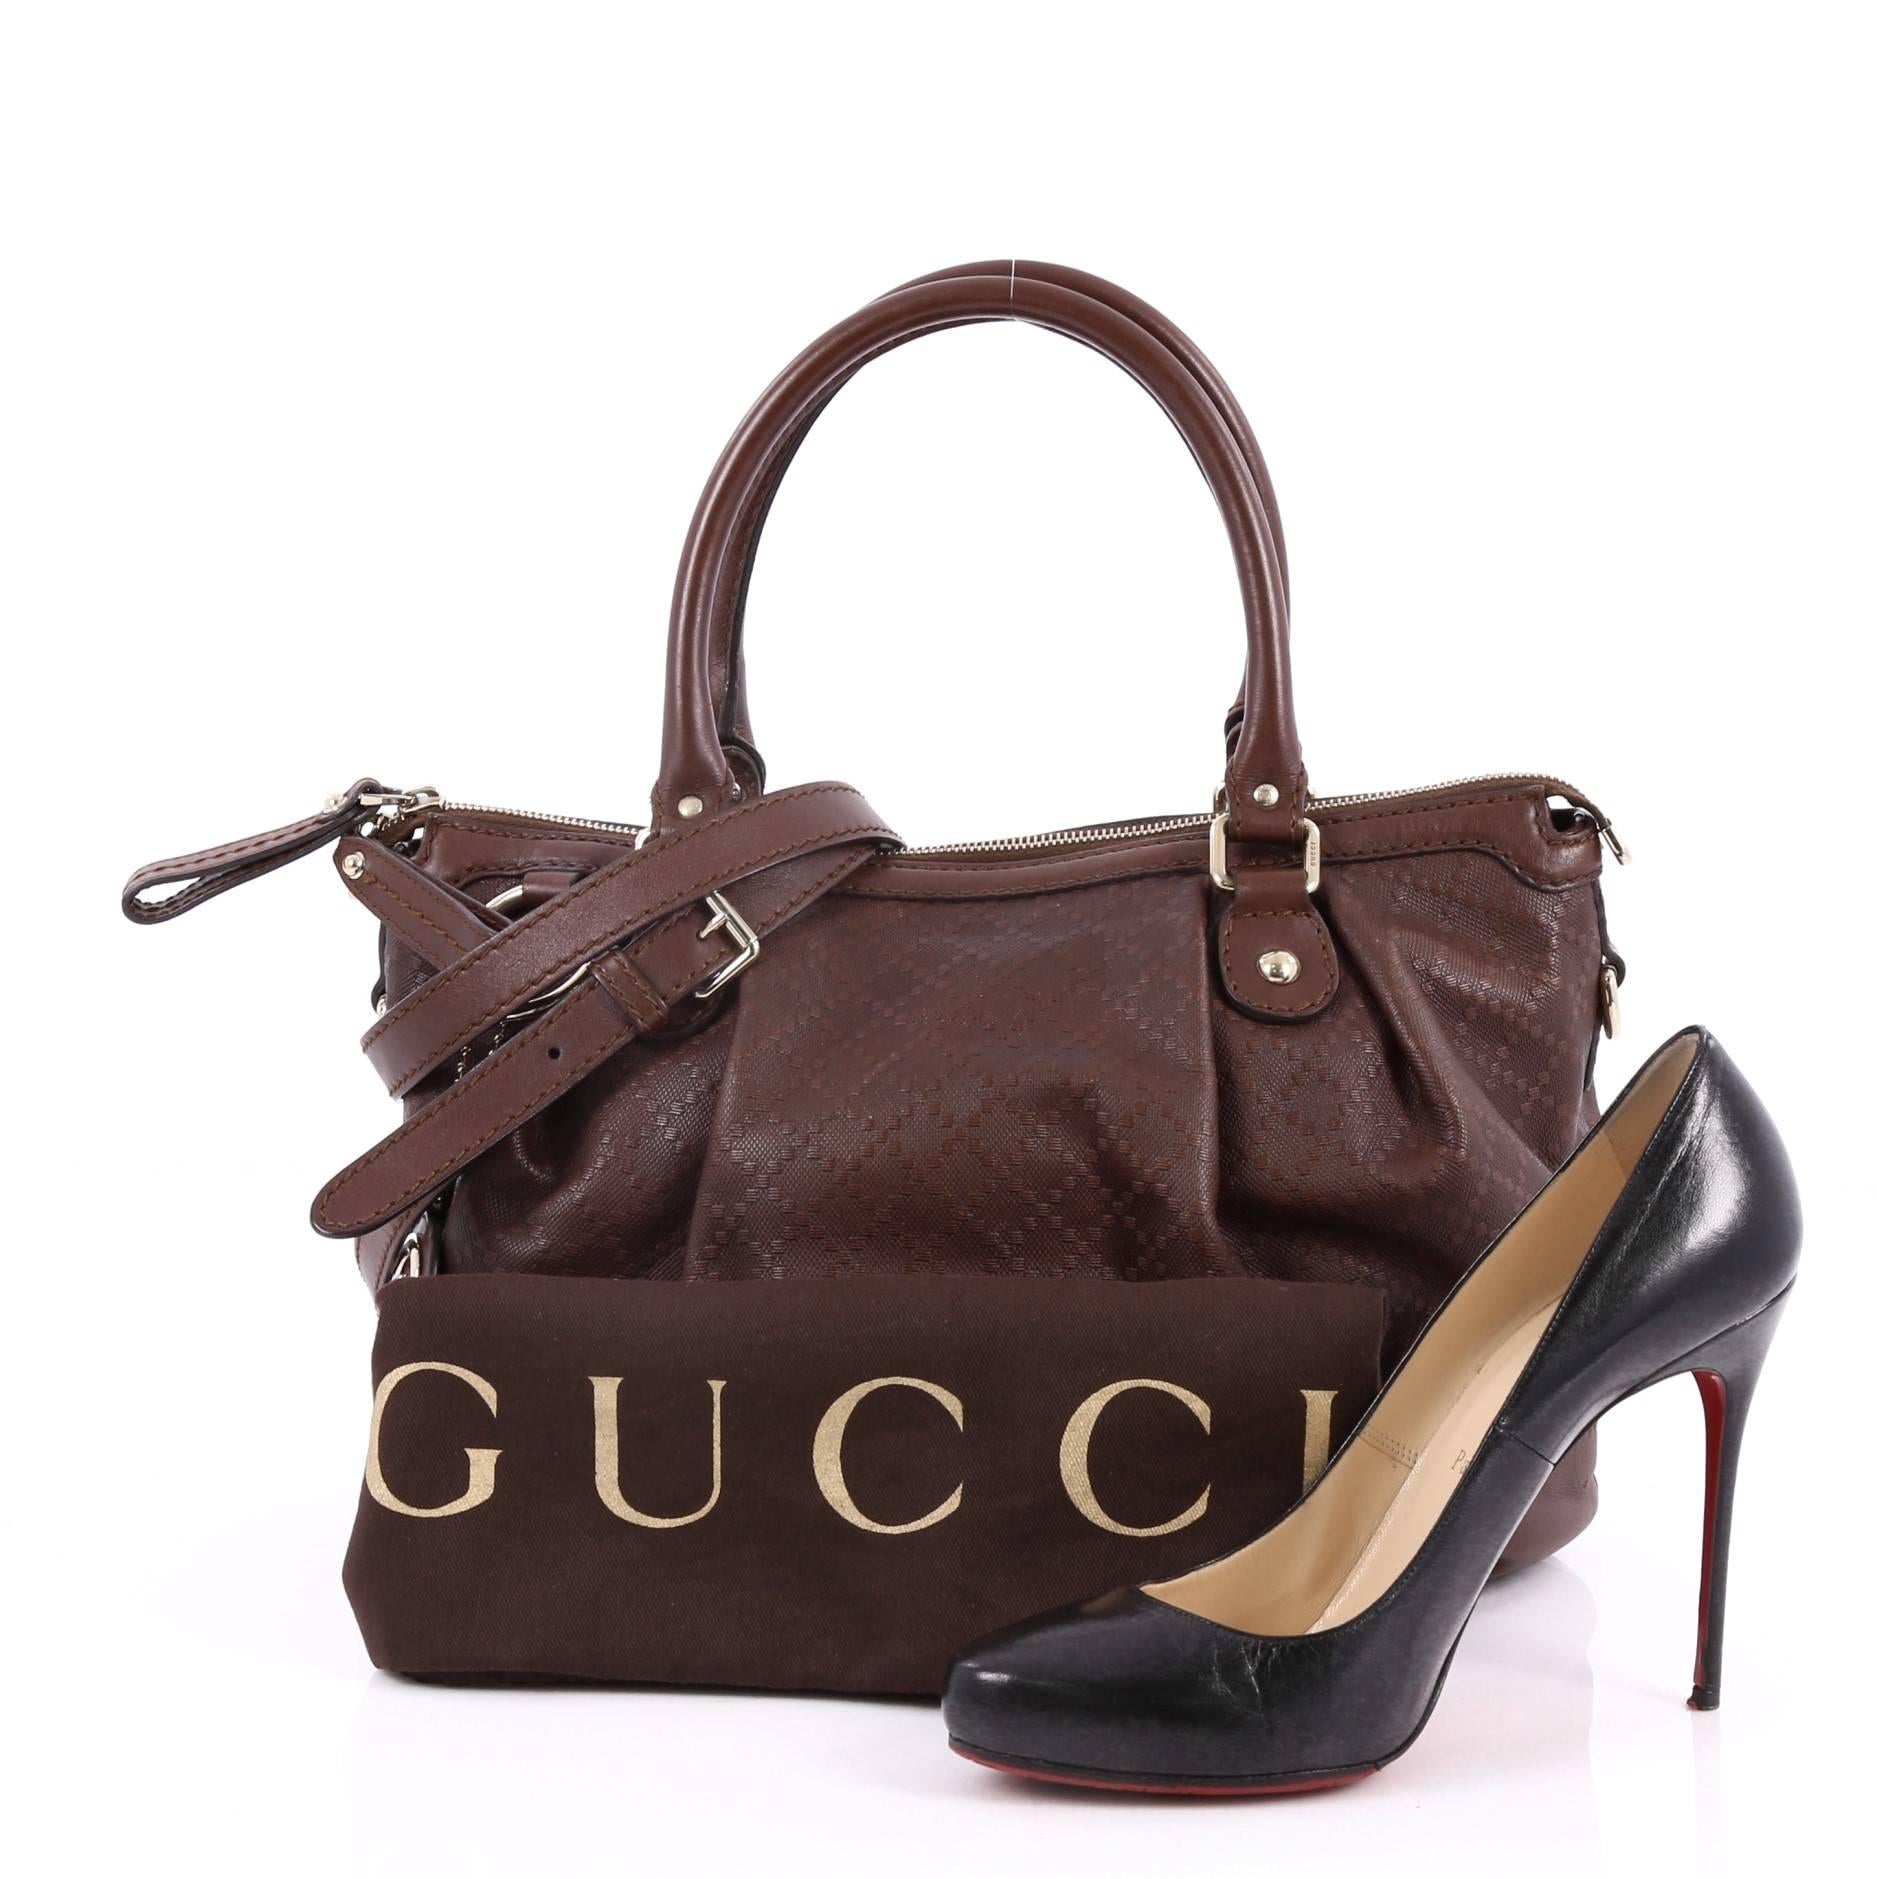 This authentic Gucci Sukey Top Handle Satchel Diamante Leather Medium is a chic tote ideal for everyday wear. Crafted from Gucci's brown diamante leather with leather trims, this roomy tote features a ruched design, dual-rolled handles and gold-tone